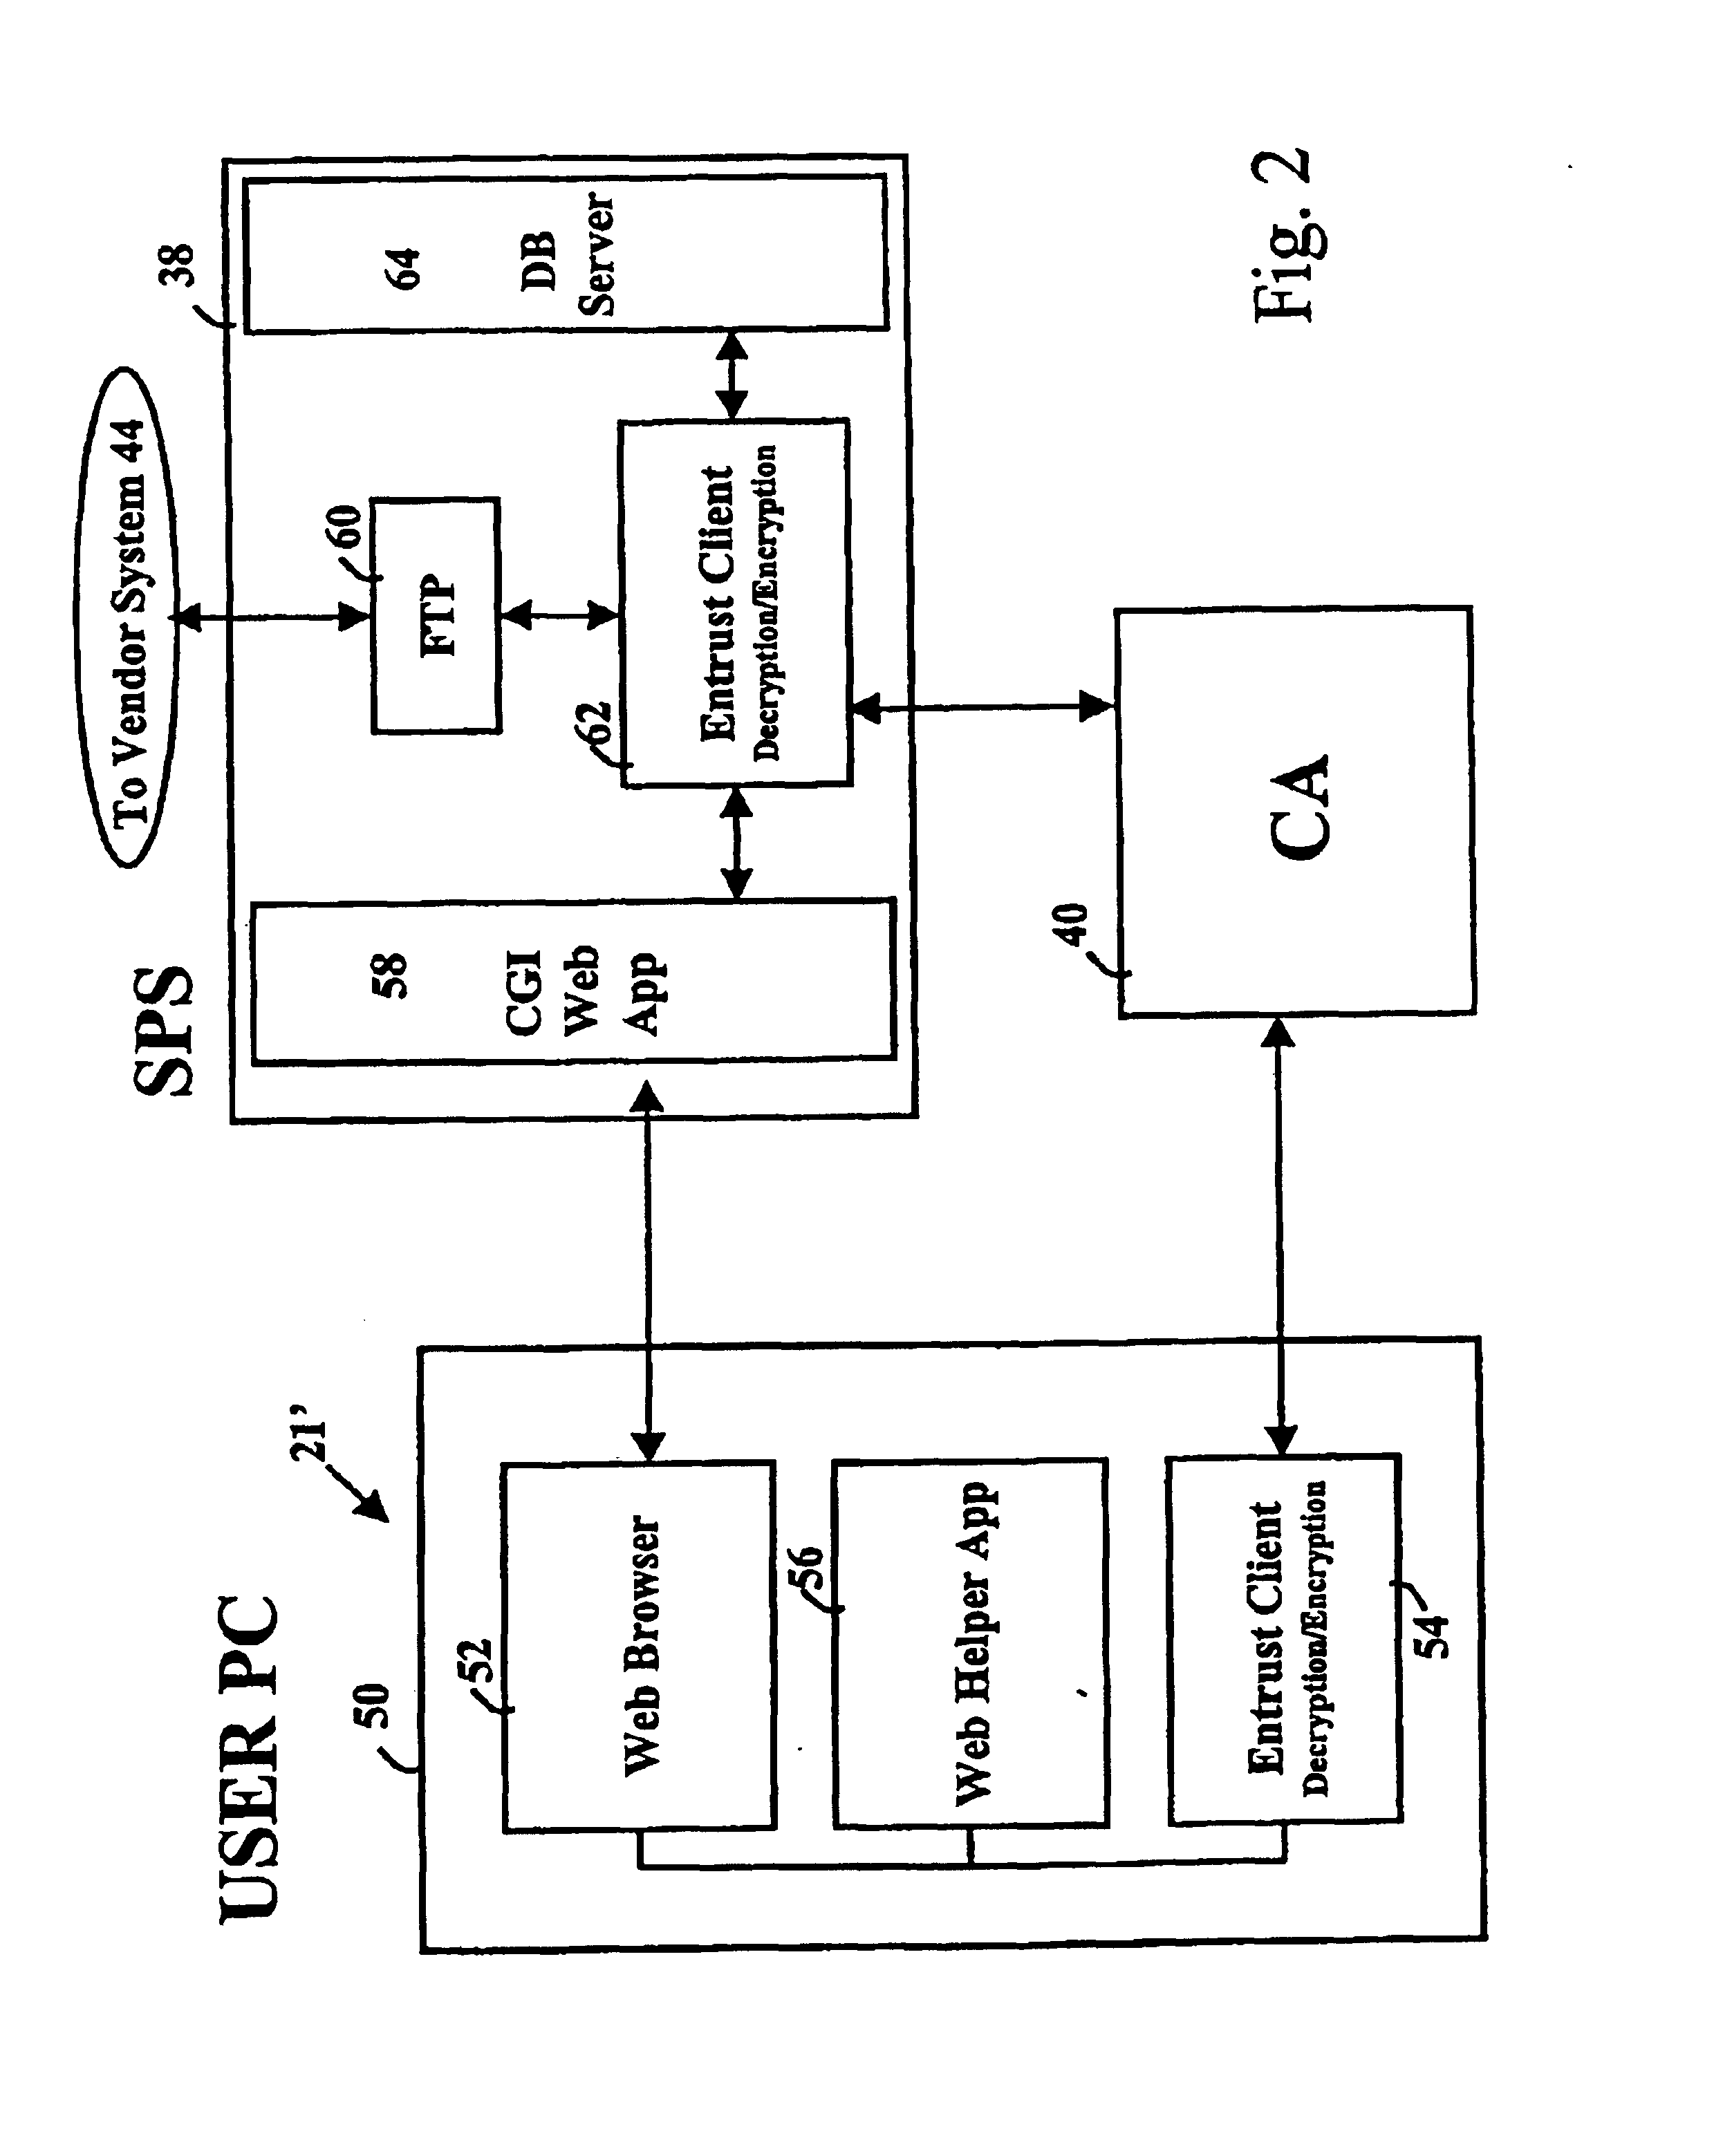 Secure electronic procurement system and method